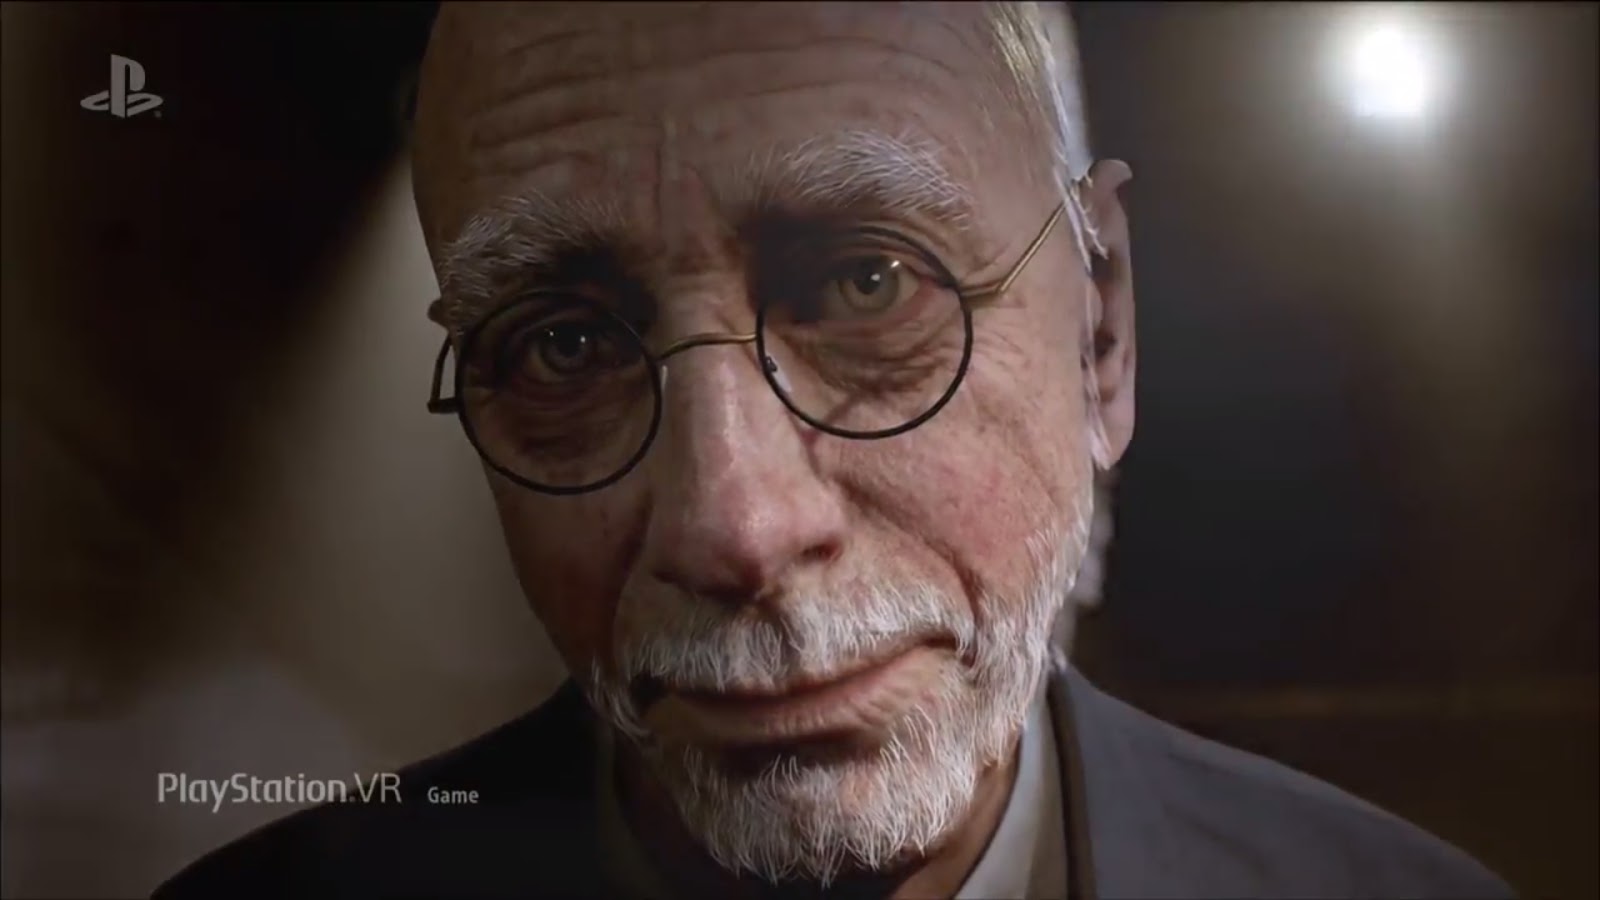 The Inpatient Playstation VR